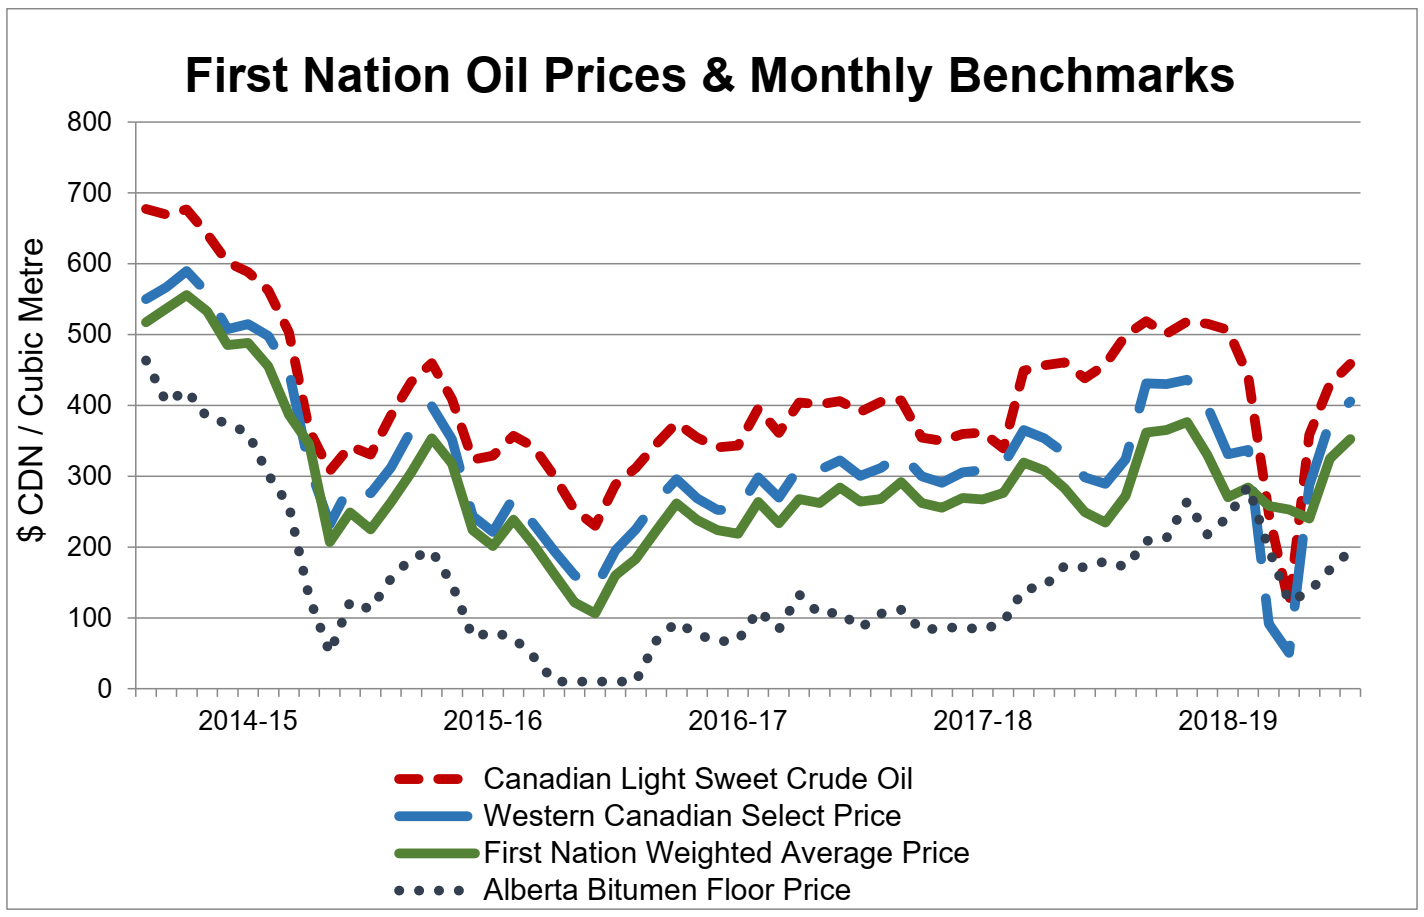 First Nation Oil Prices & Monthly Benchmarks